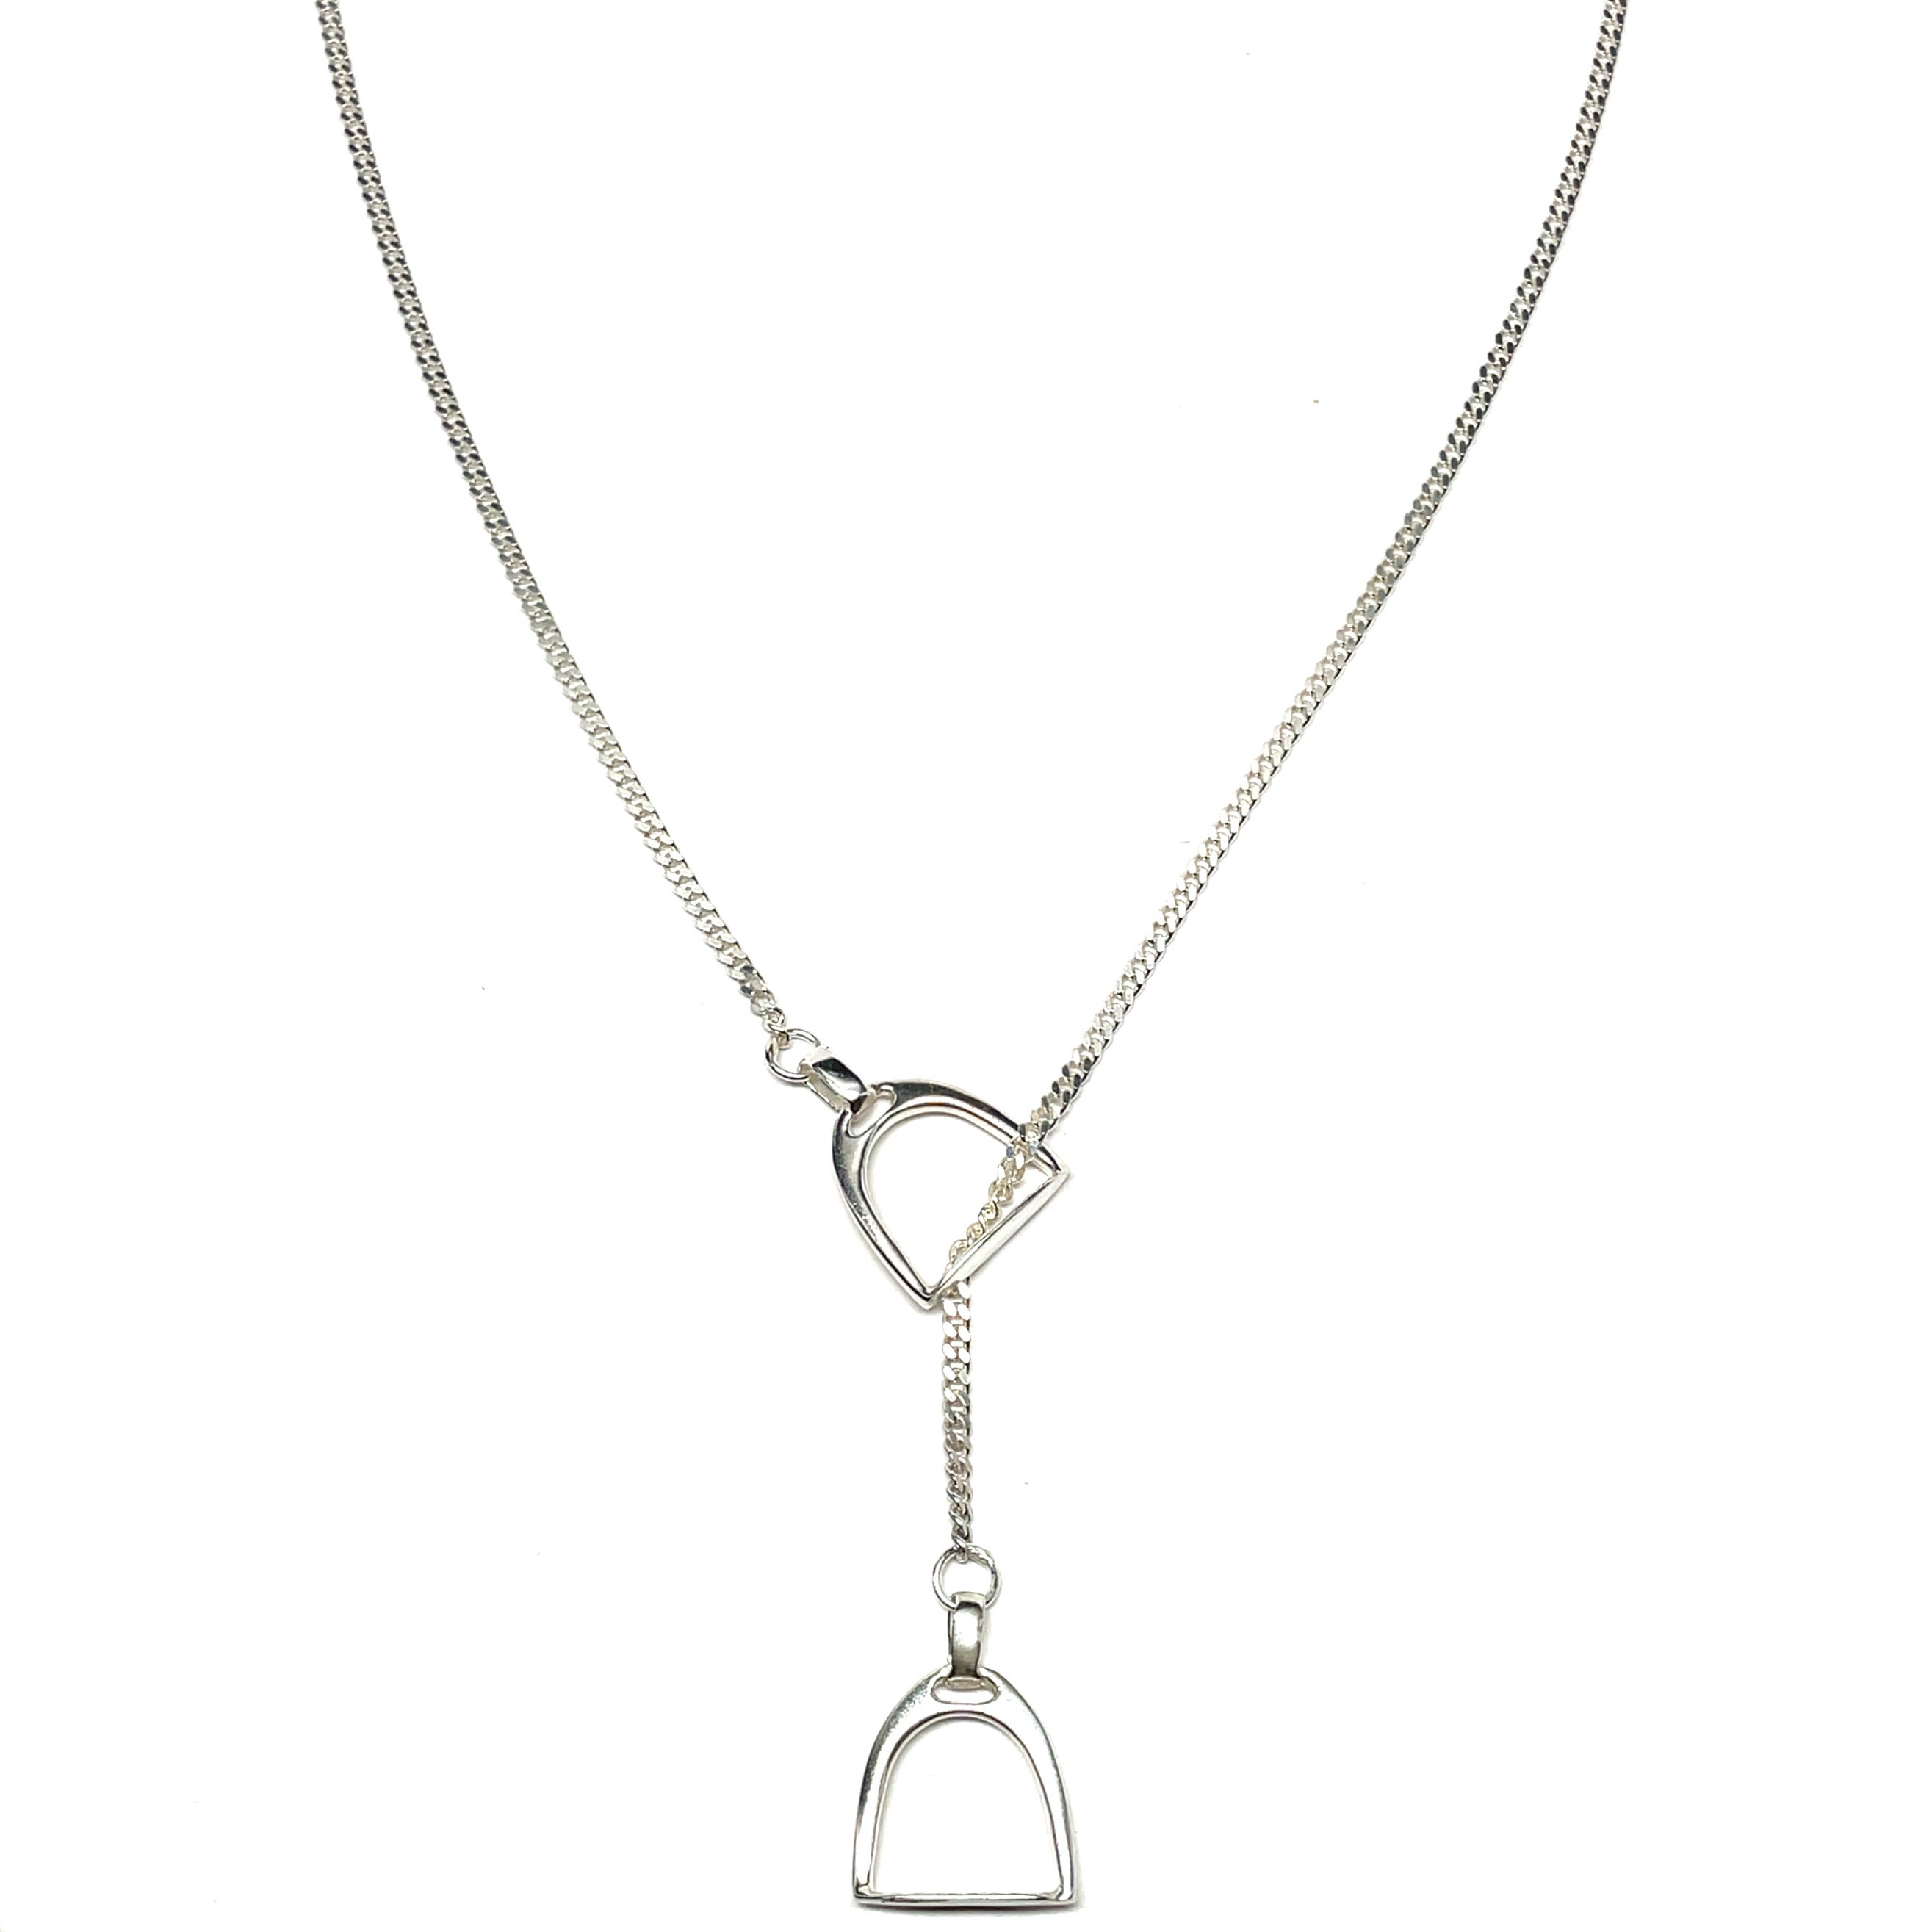 Large double stirrup silver necklace